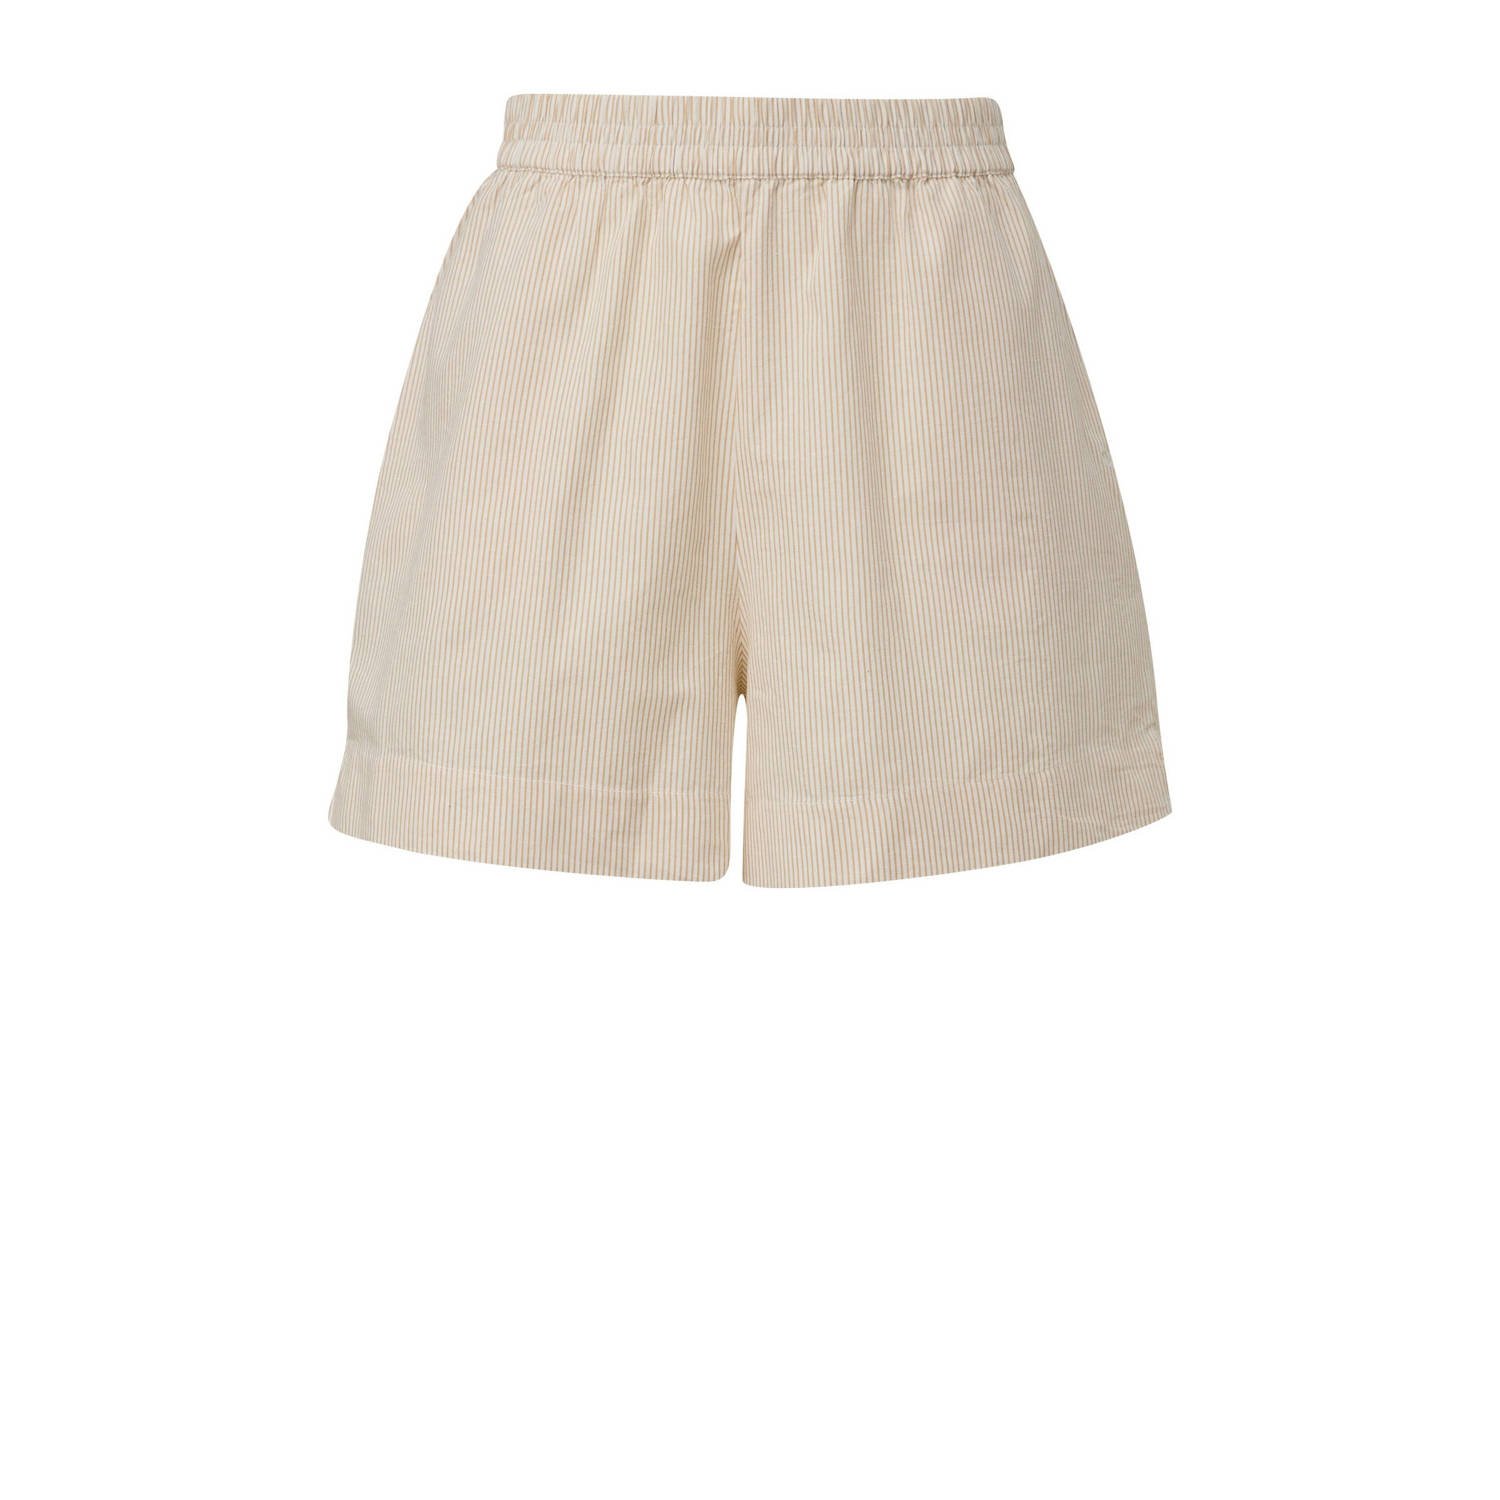 Q S by s.Oliver high waist loose fit short beige